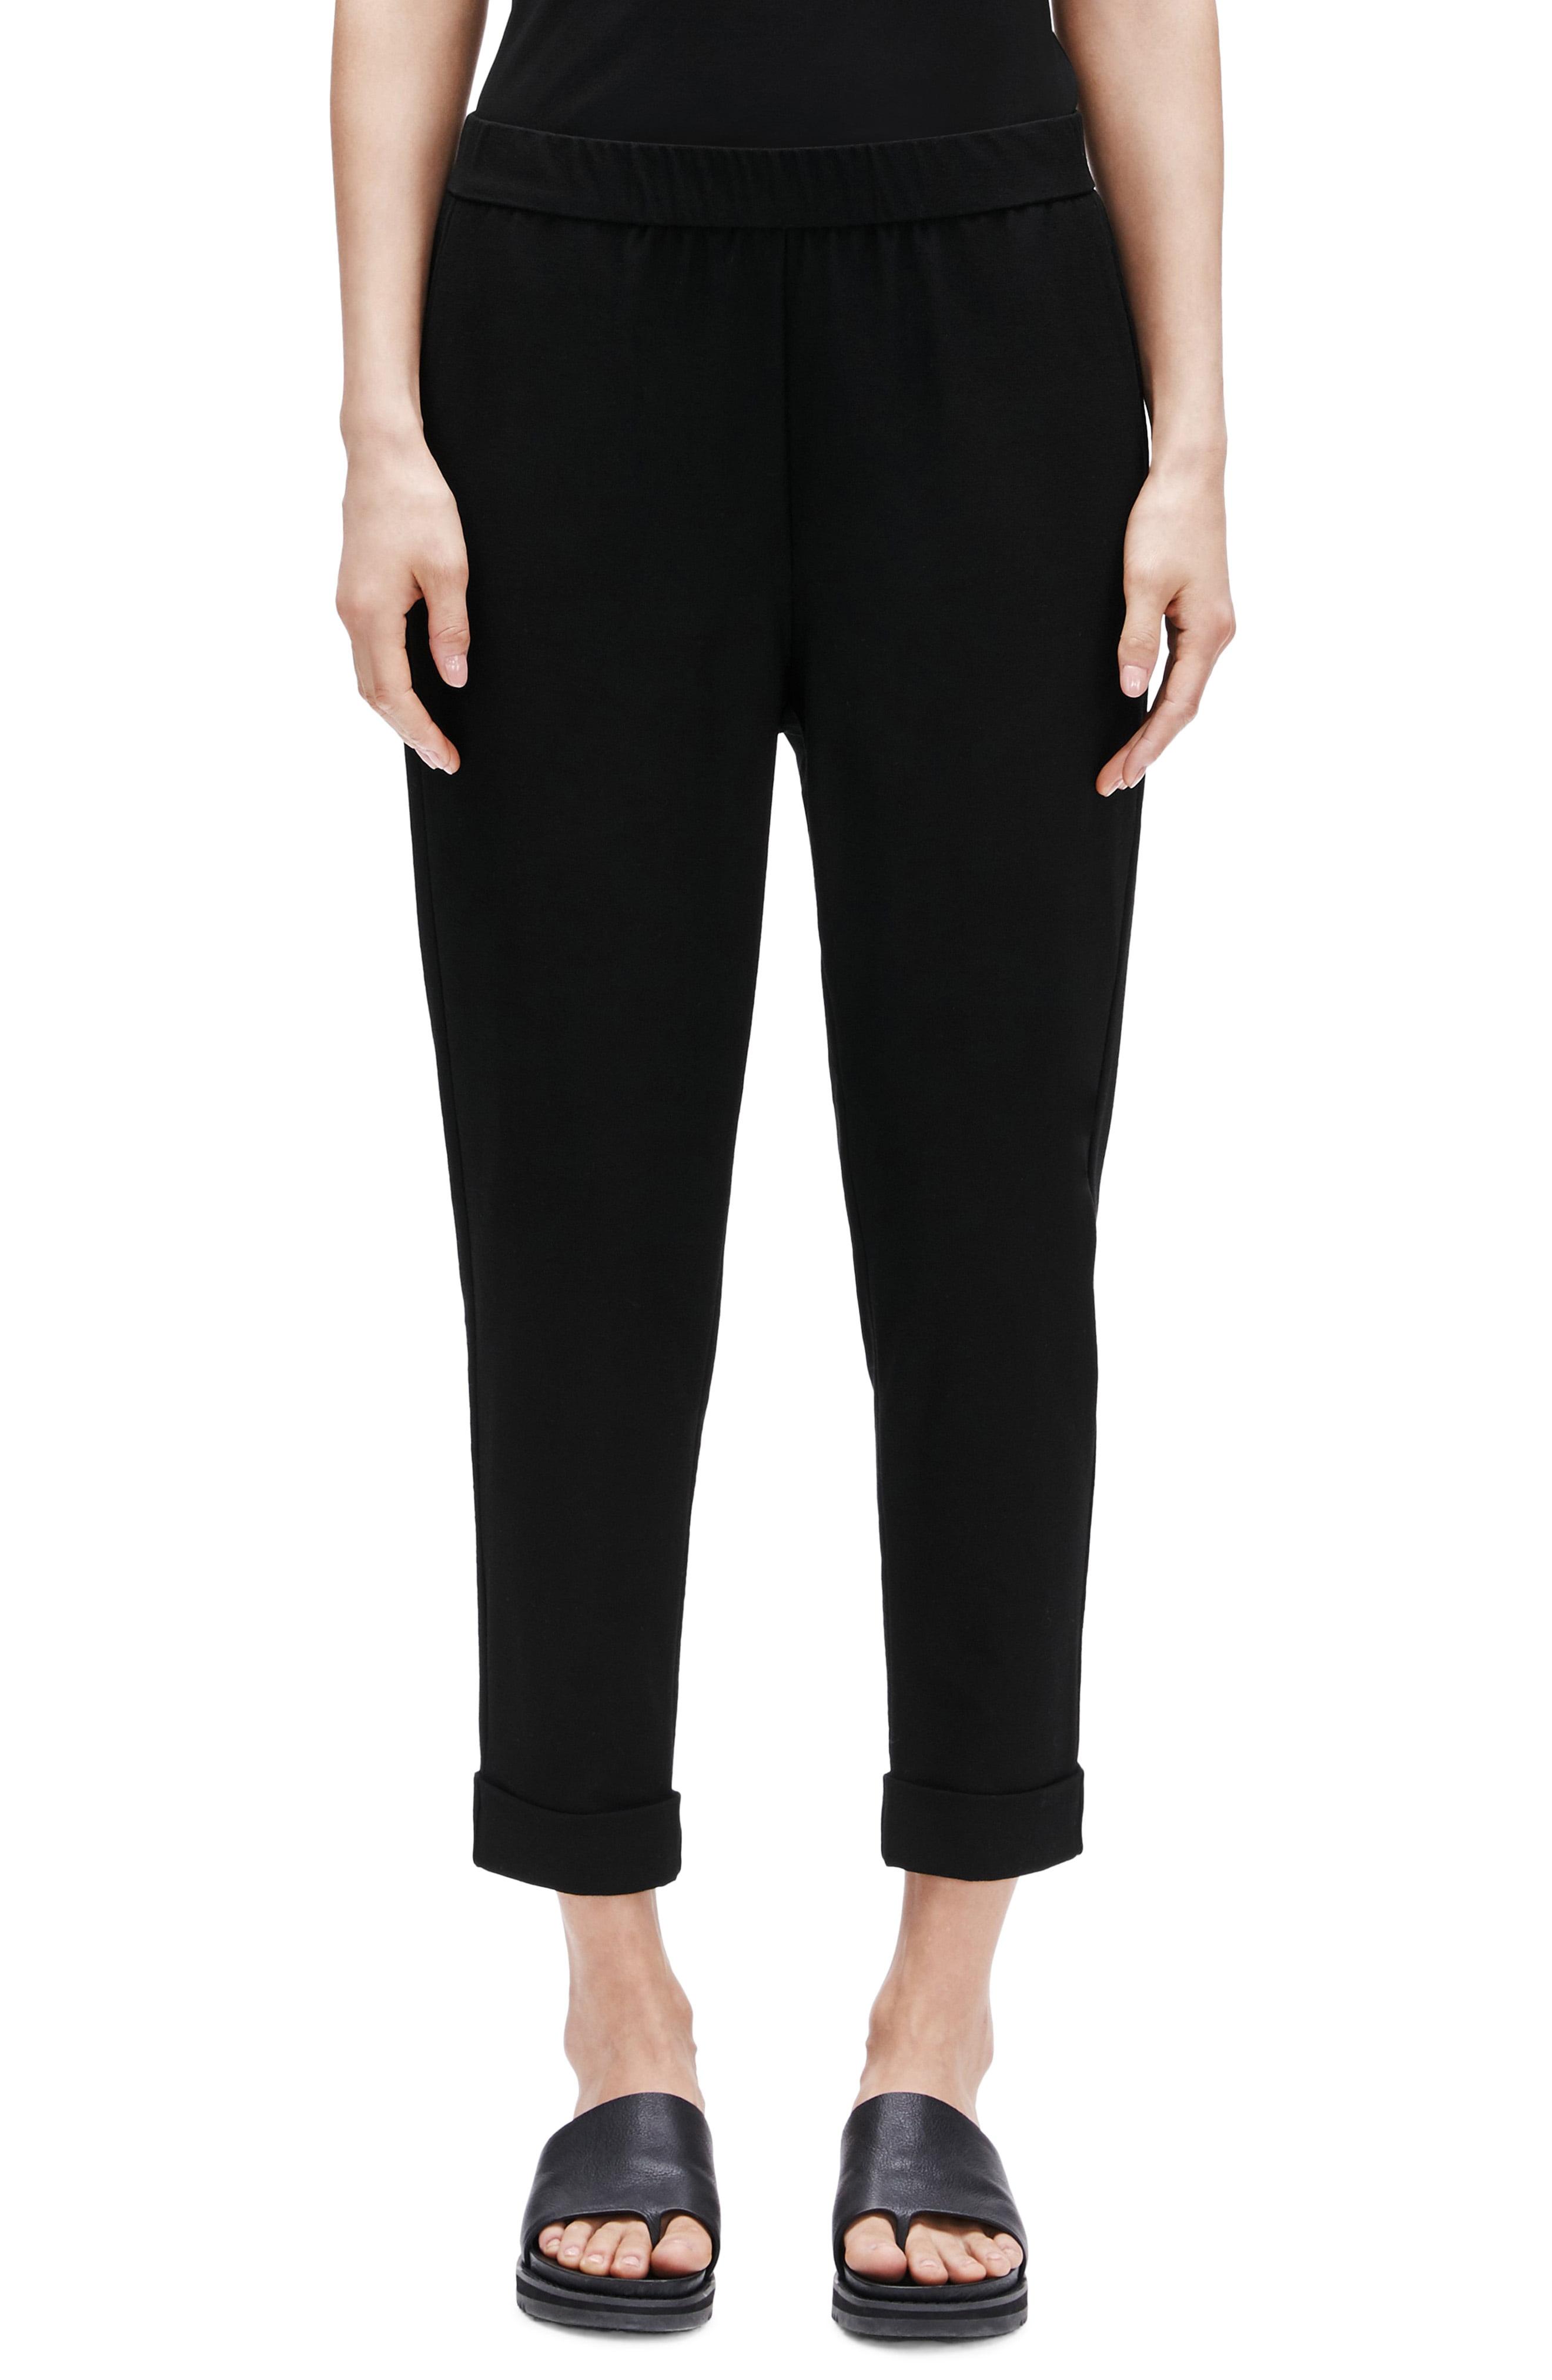 Eileen Fisher Cuffed Slouchy Ankle Pants in Black - Lyst